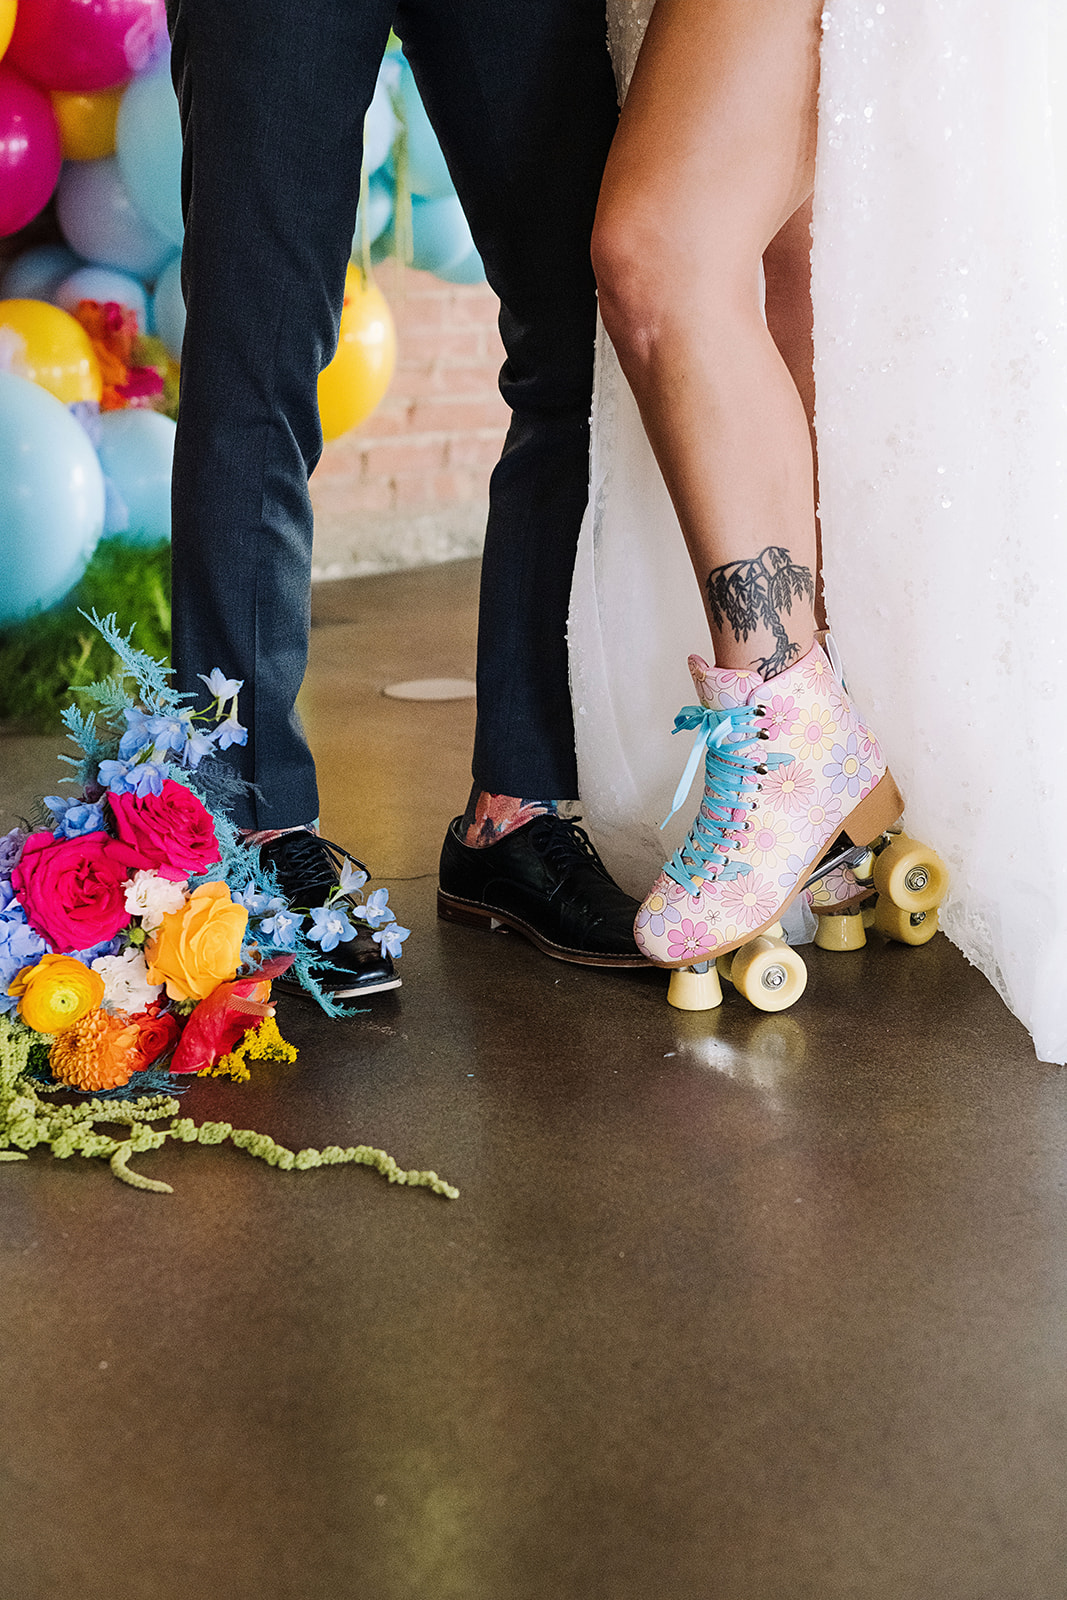 Bride wears floral roller skates as part of a colorful wedding day. Groom wears matching floral socks. Bouquet placed near shoes. #Kaushay&Co #Kaushay&CoWeddings #Wedding #ColorfulWedding #UtahWeddings #weddingplannerutah #Utahweddingplanner #NorthernUtahEventPlanner